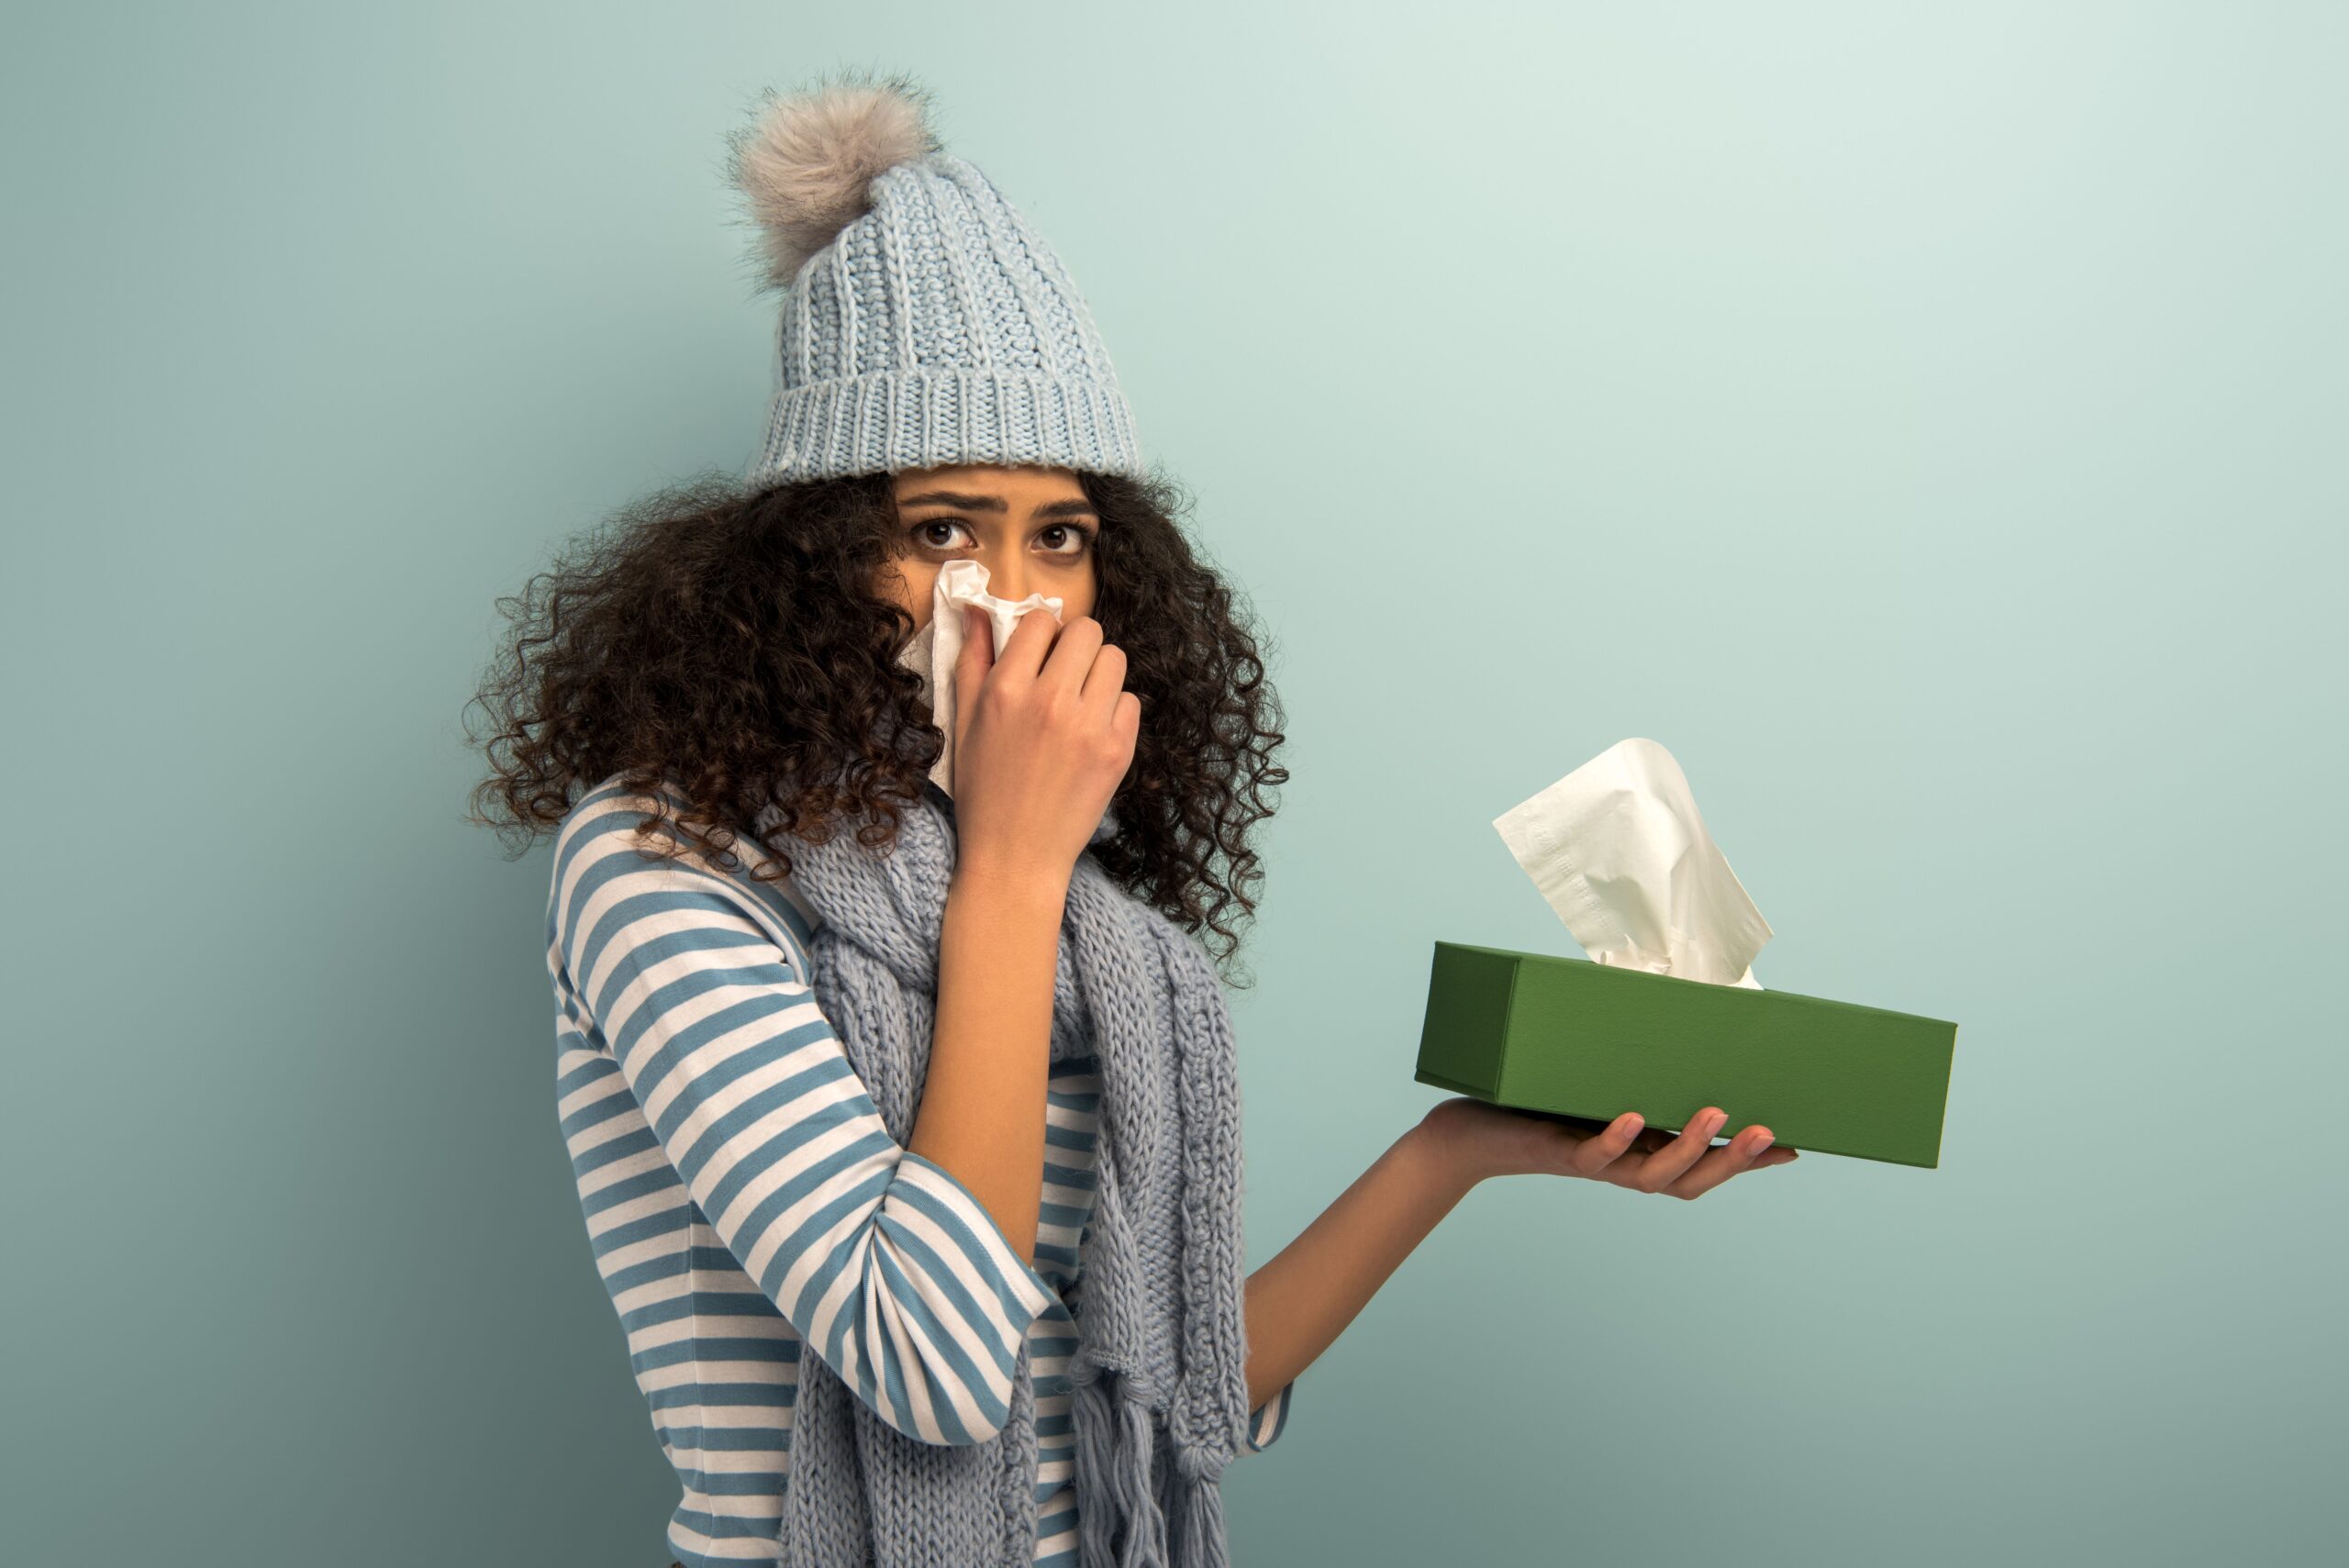 Covid and the Flu Share Many Symptoms